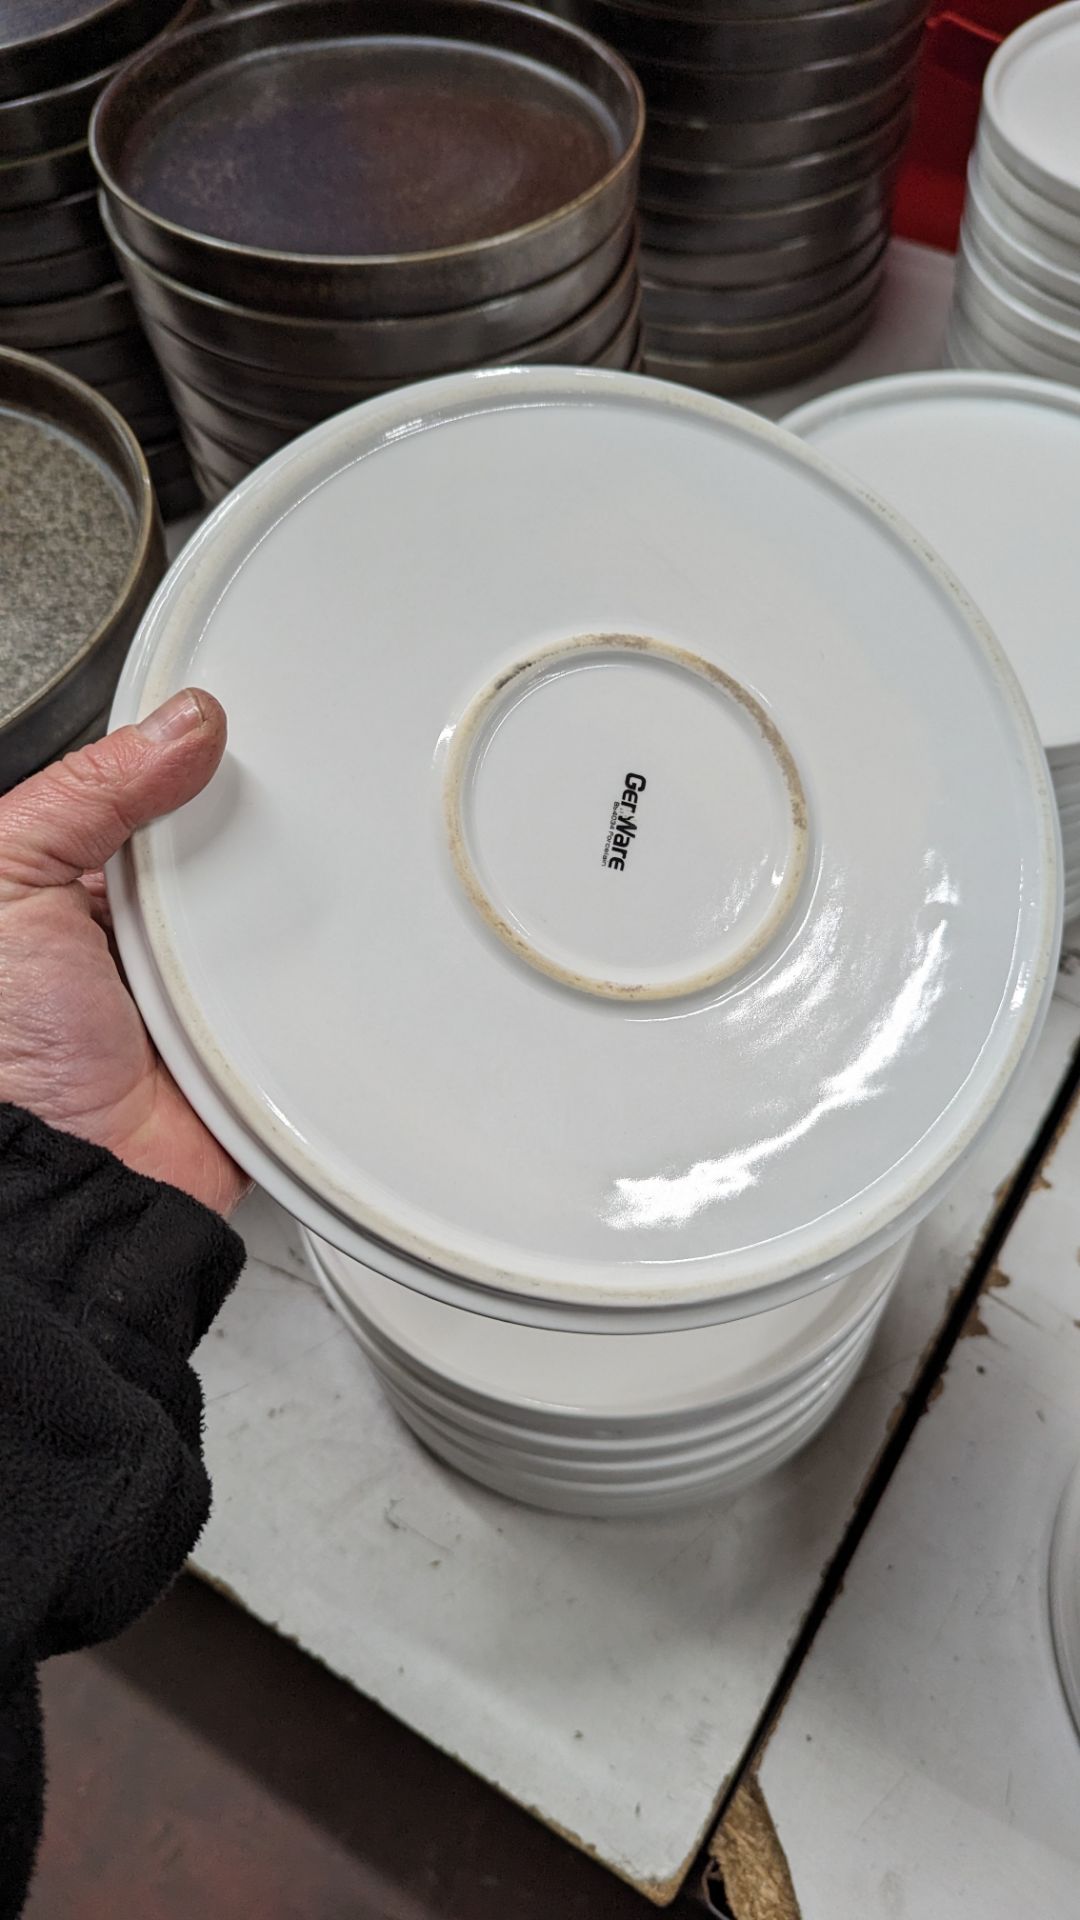 33 off Genware 245mm round flat plates with upright rim to the outer edge - Image 6 of 6